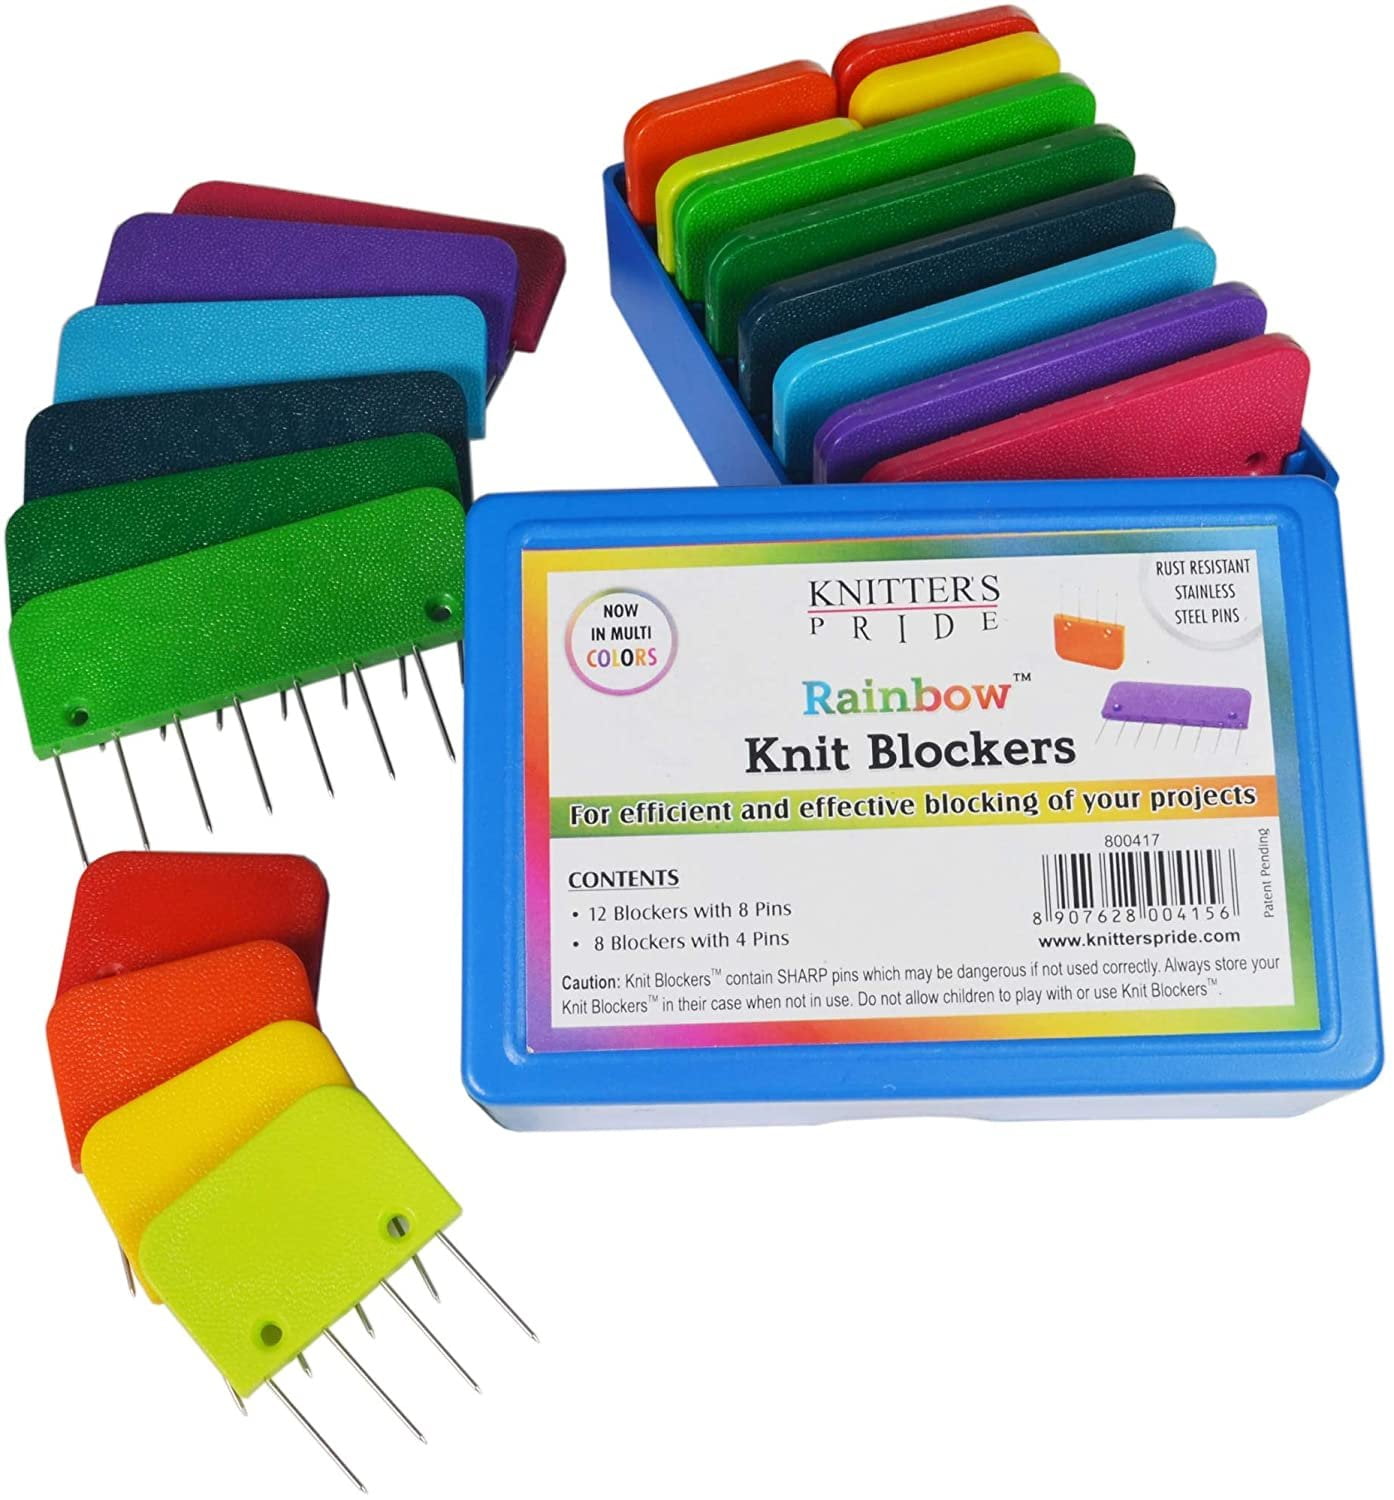 KnitPro rainbow knit blockers 20 pieces rust resistant stainless steel 